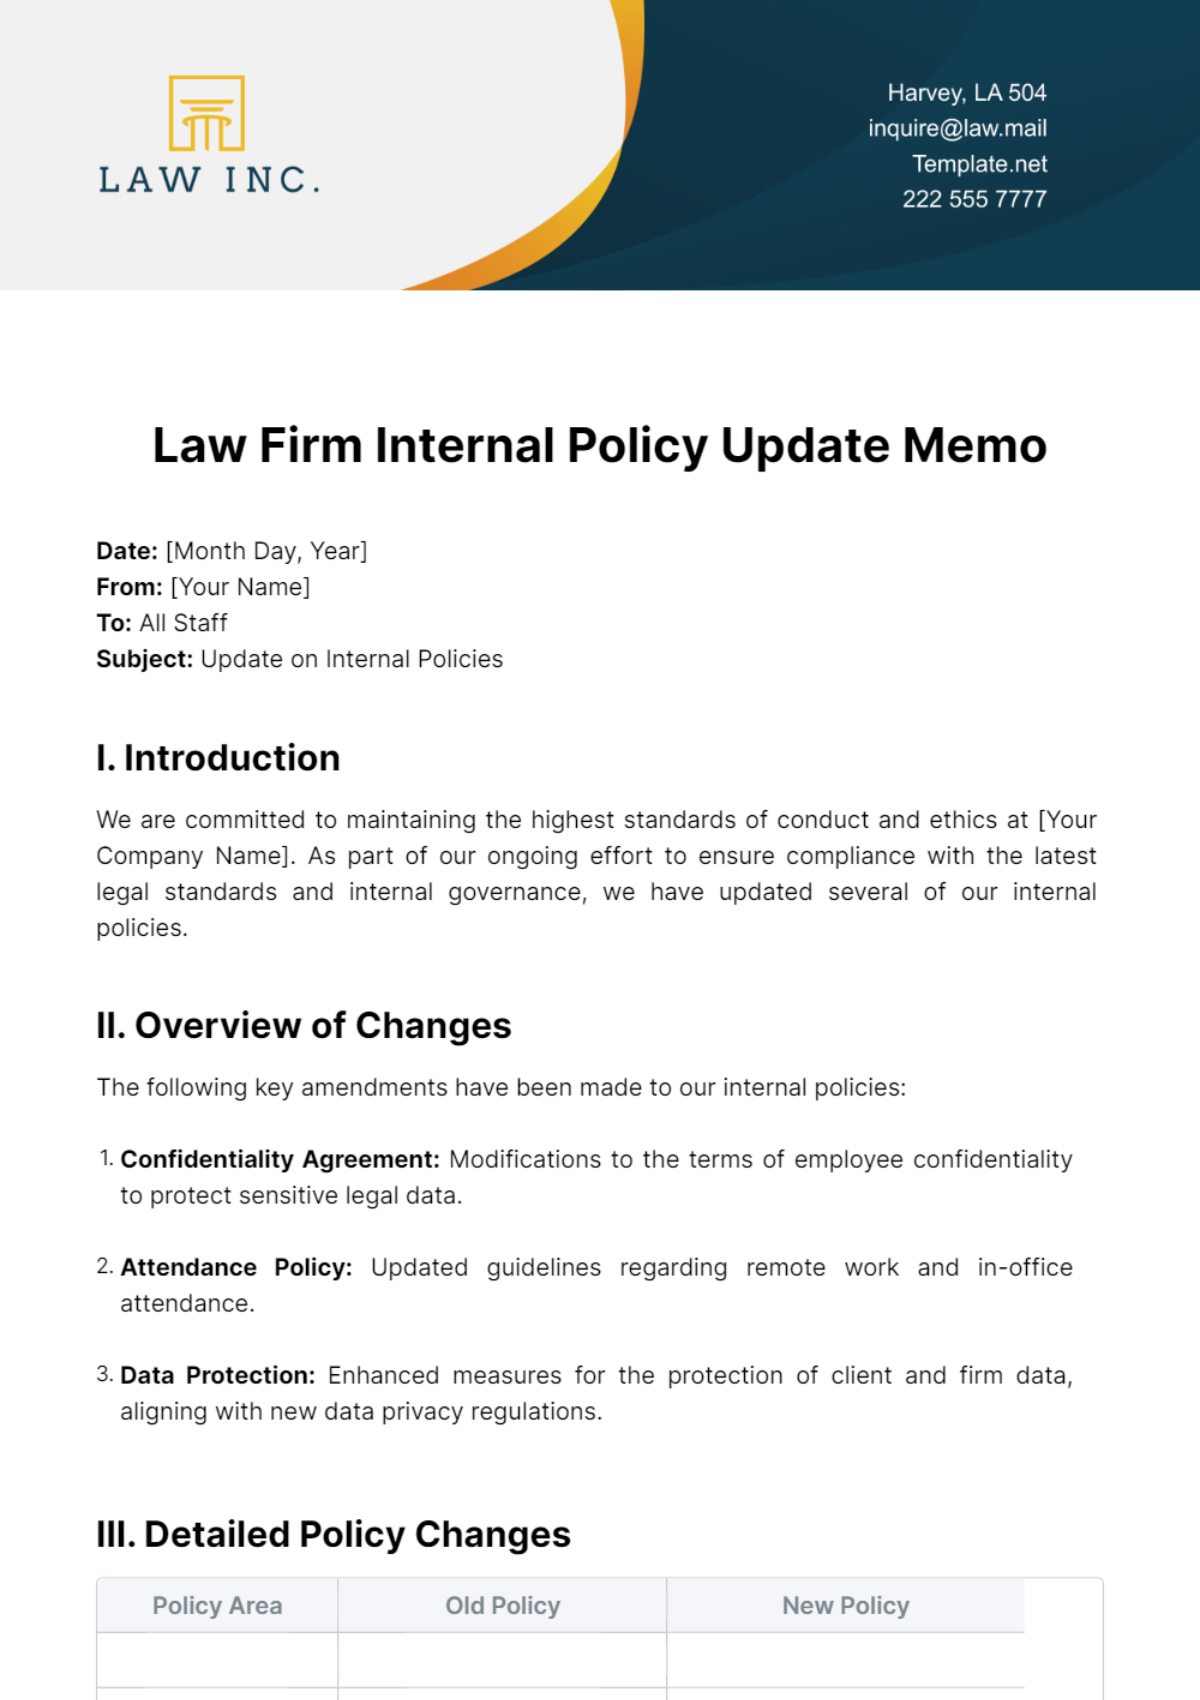 Law Firm Internal Policy Update Memo Template